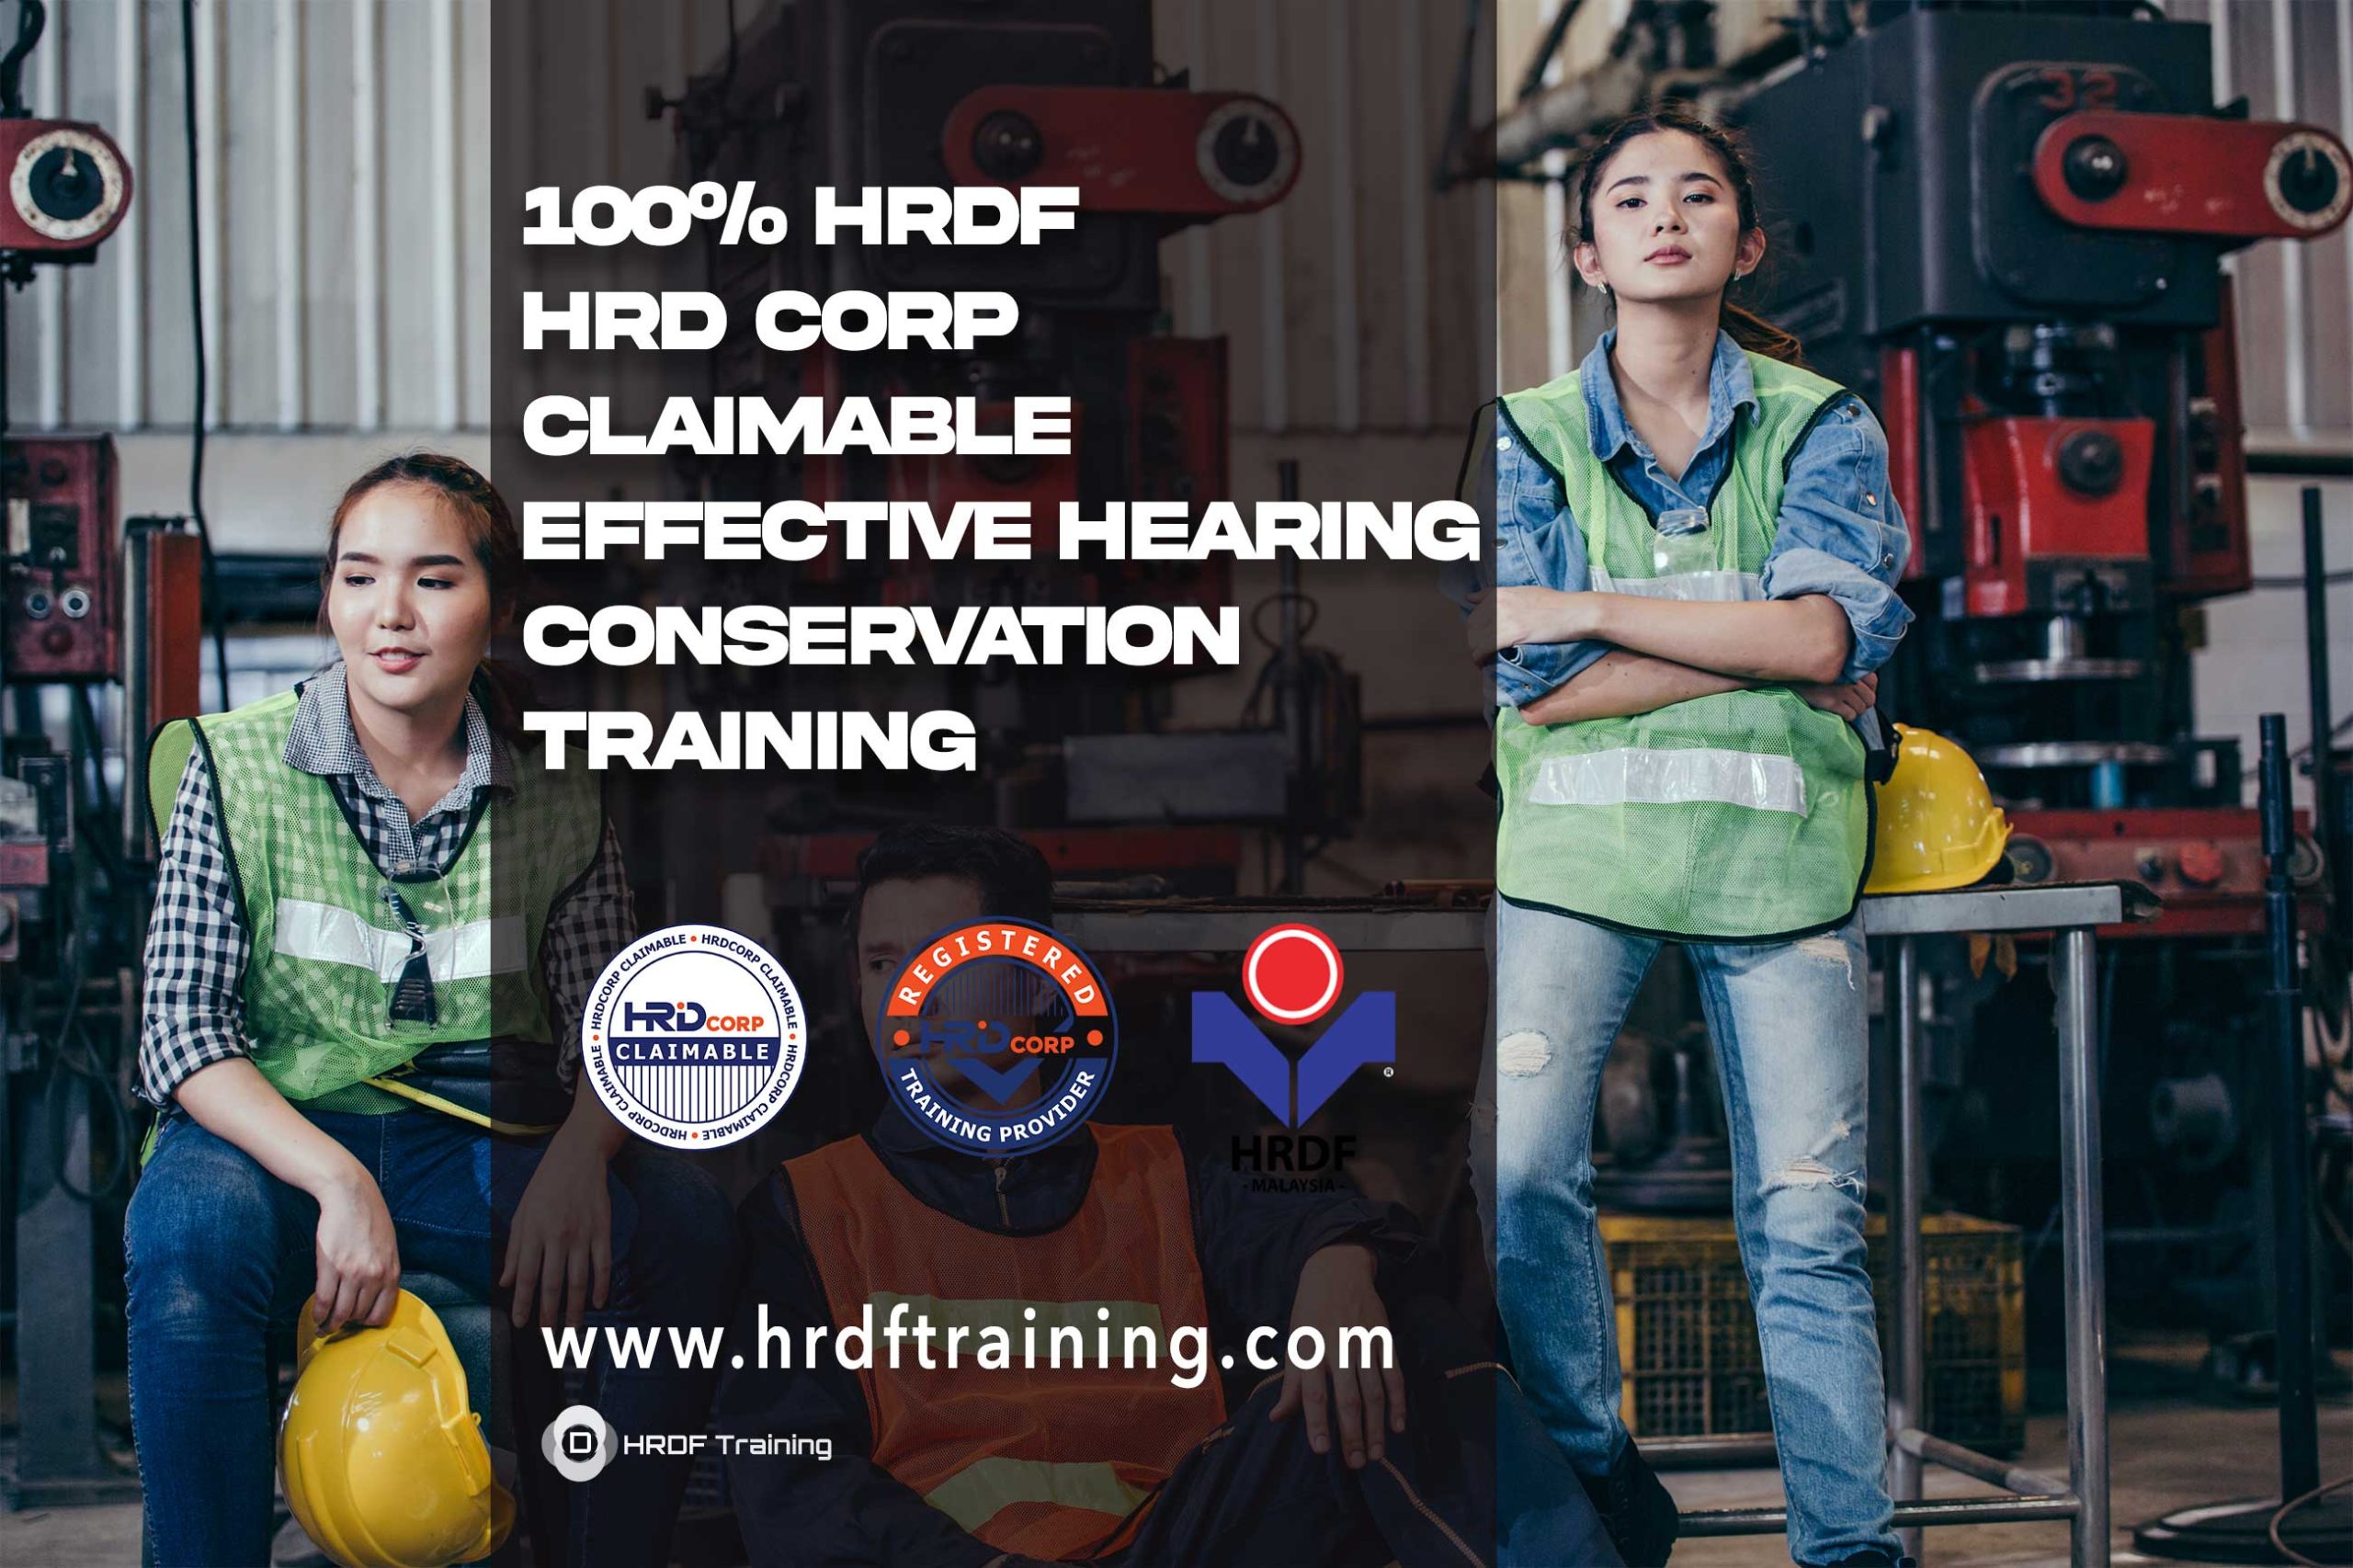 HRDF-HRD-Corp-Claimable-Effective-Hearing-Conservation-Training